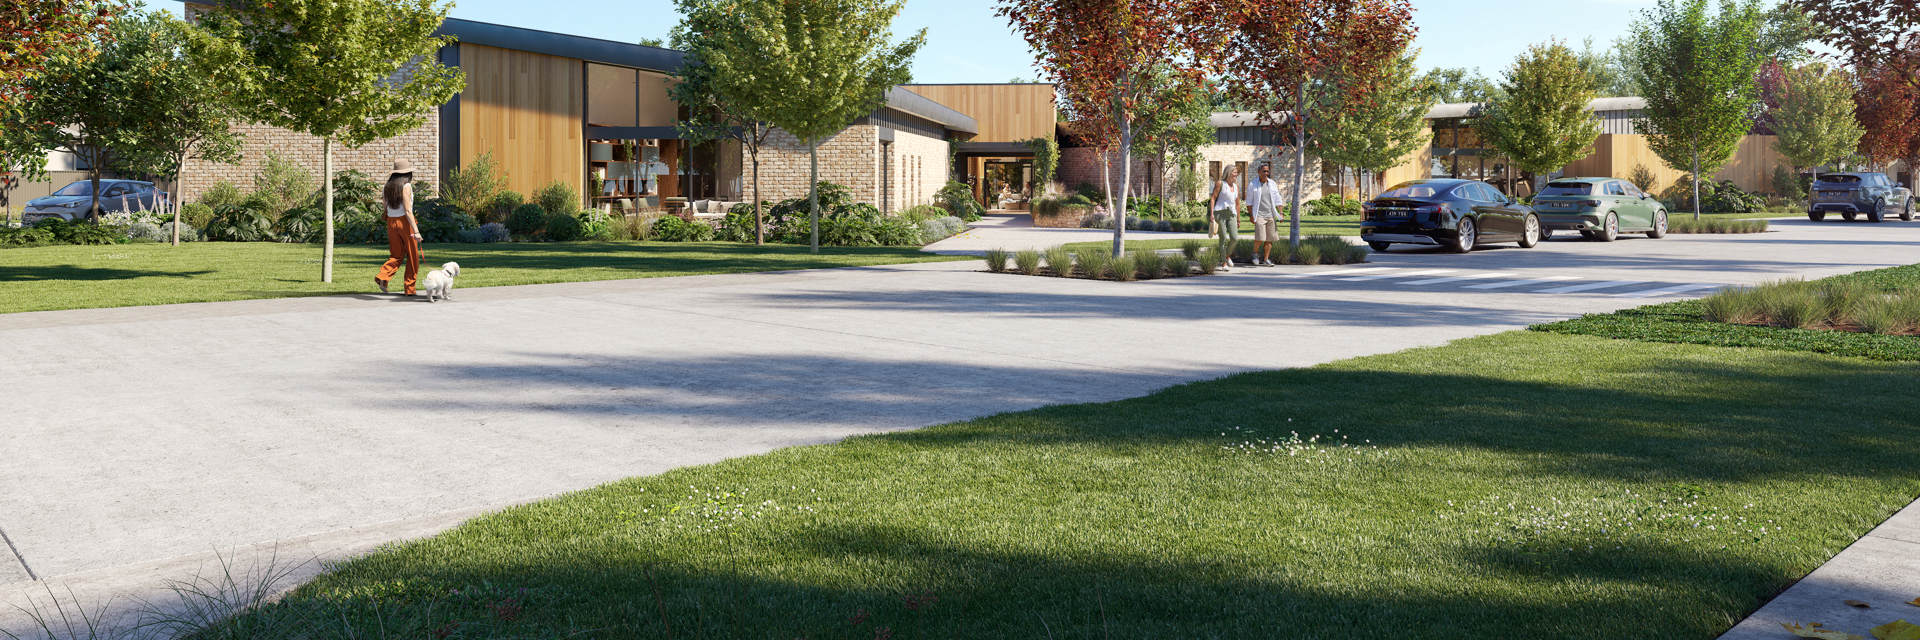 Render of Halcyon Highlands streetscape